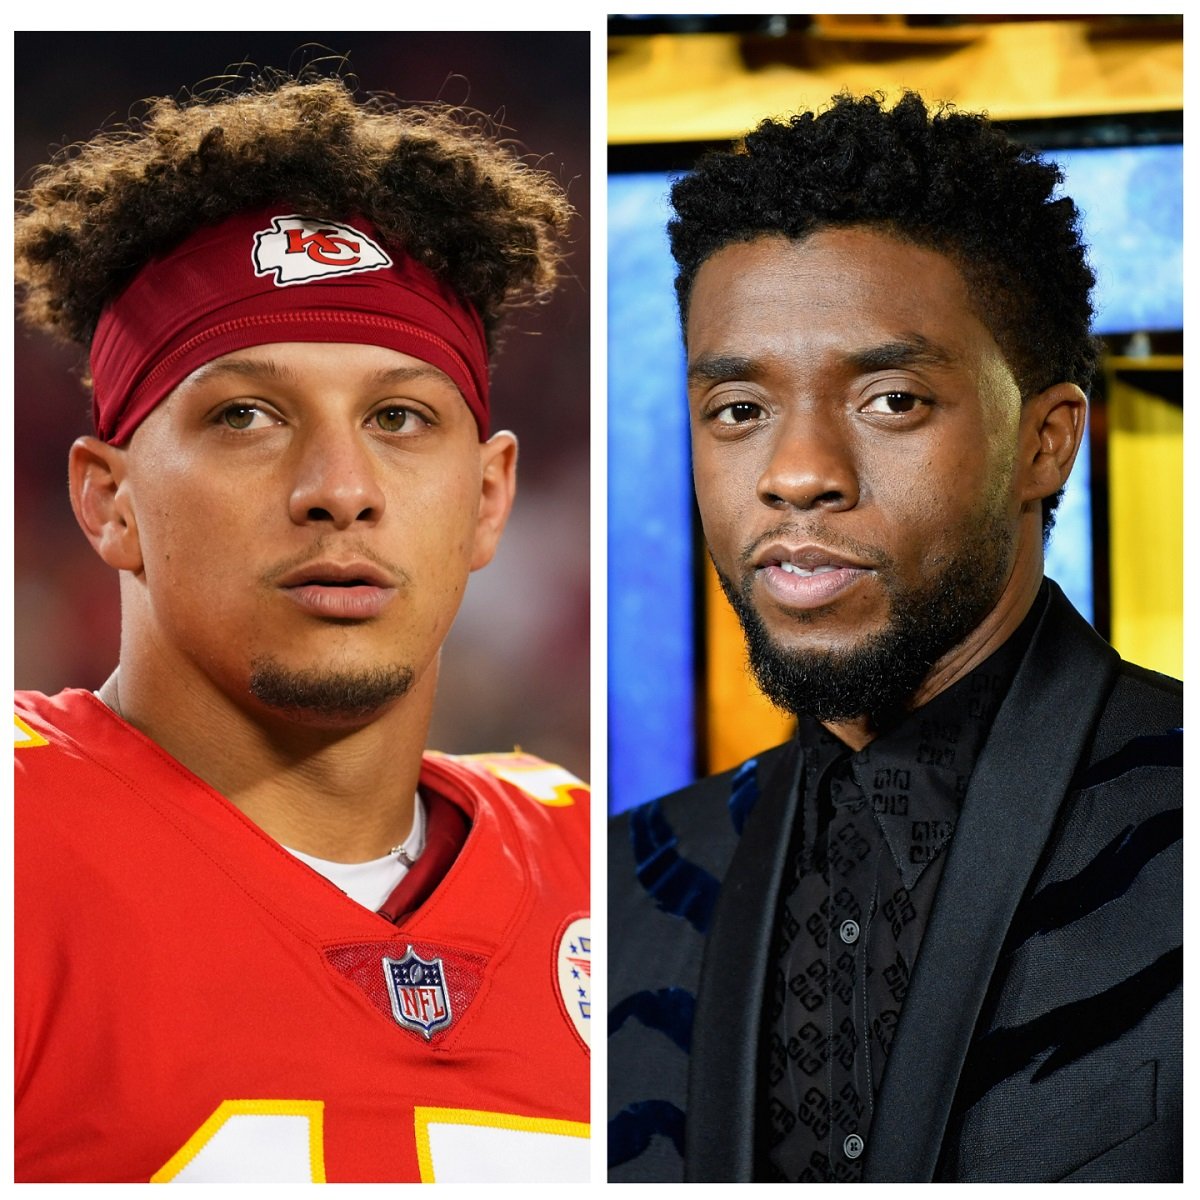 (L) Patrick Mahomes on the football field before a game, (R) Chadwick Boseman at the European premiere of 'Black Panther'